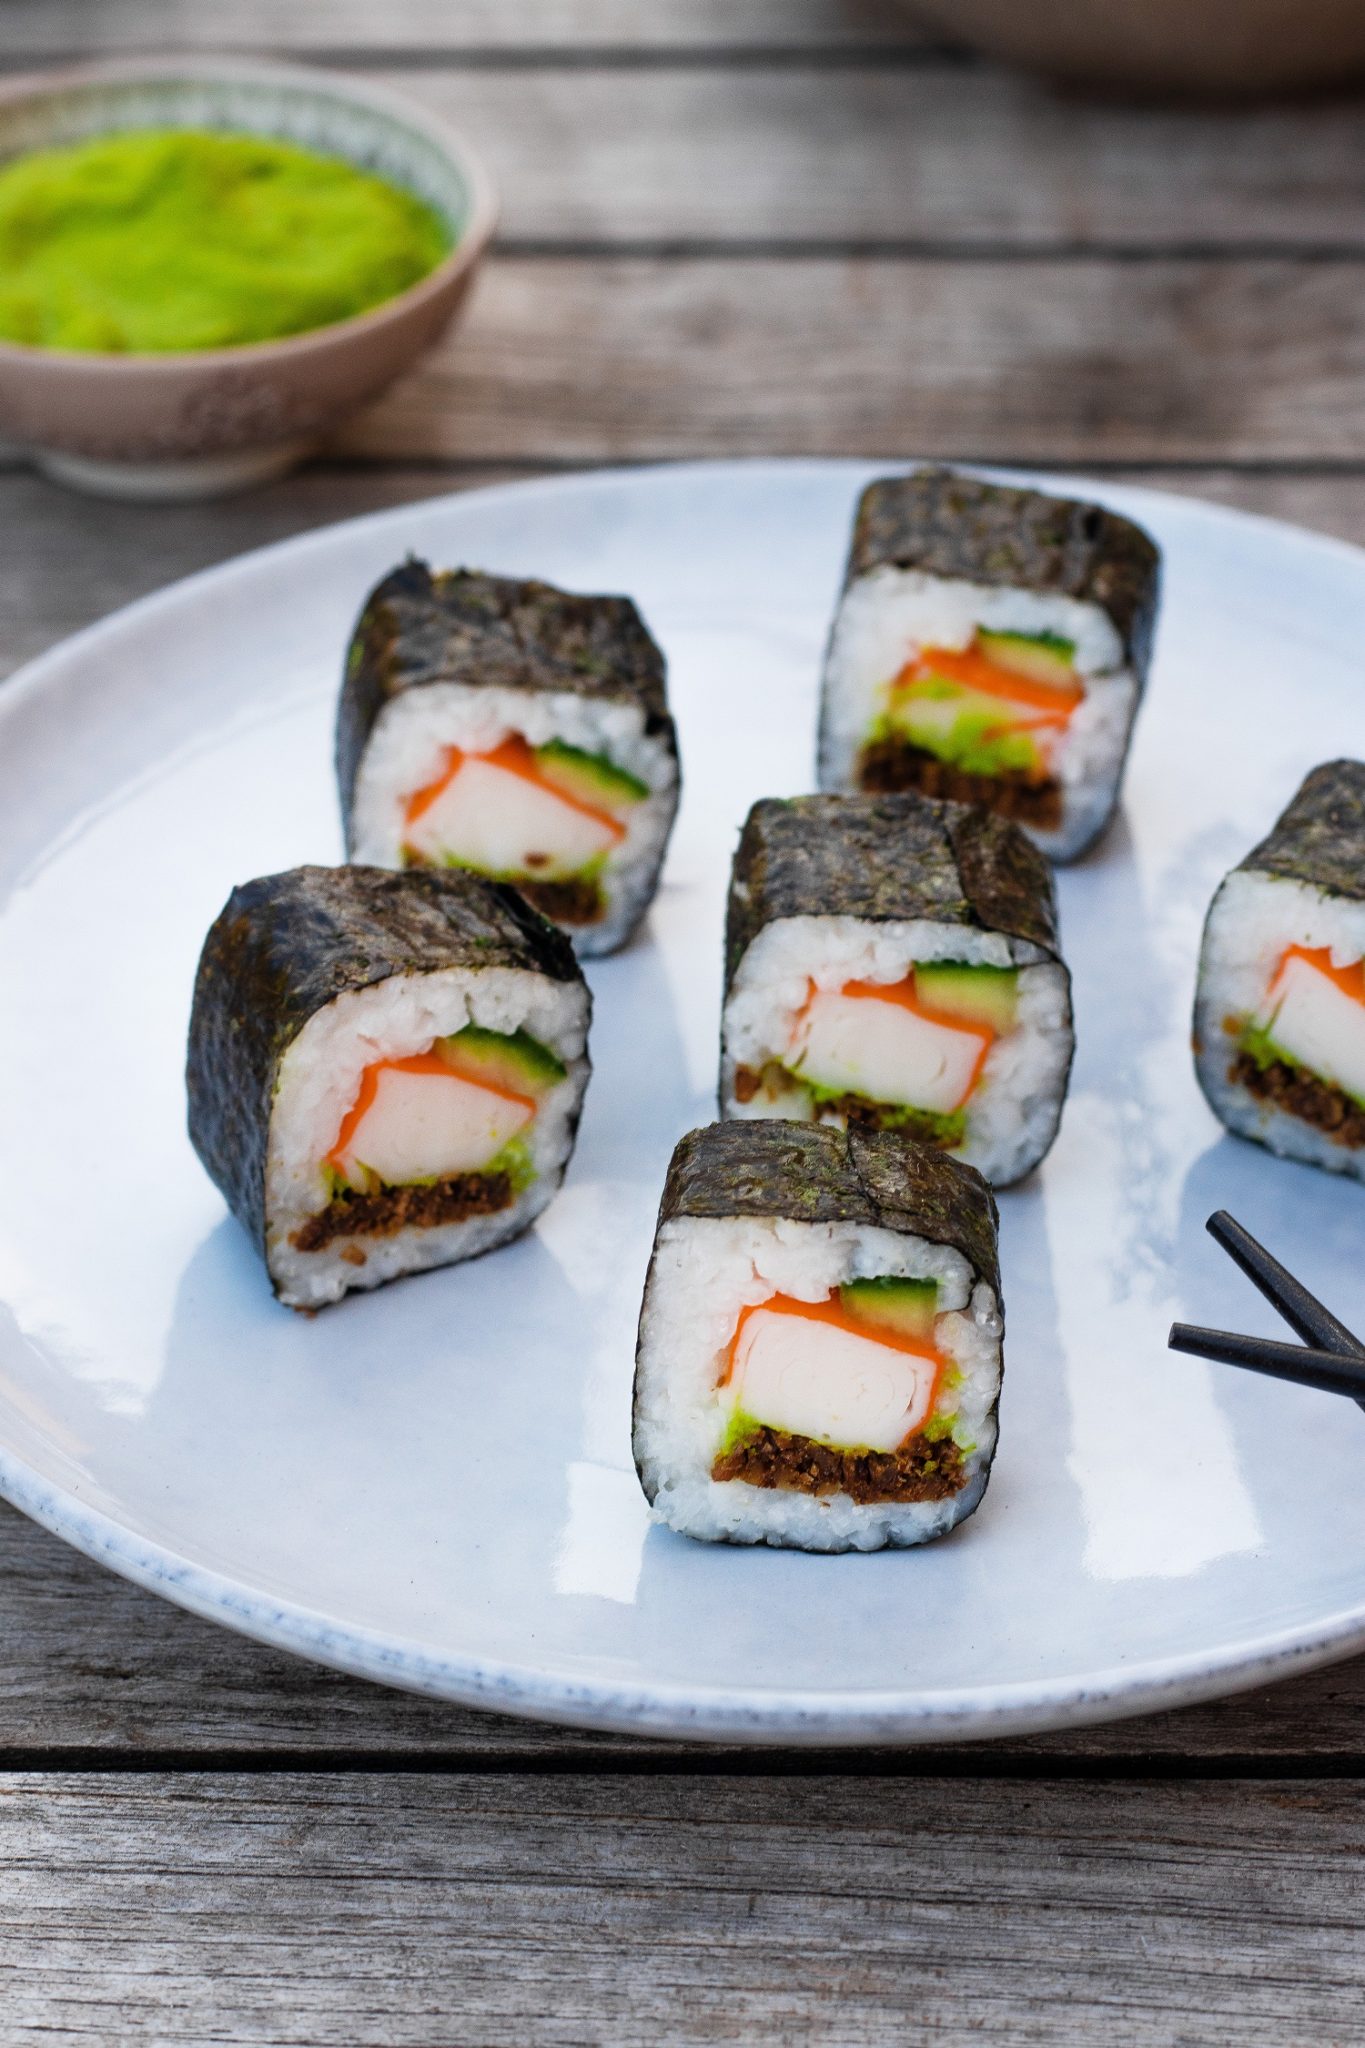 Sushi with surimi, wasabi and pumpernickel – Mestemacher